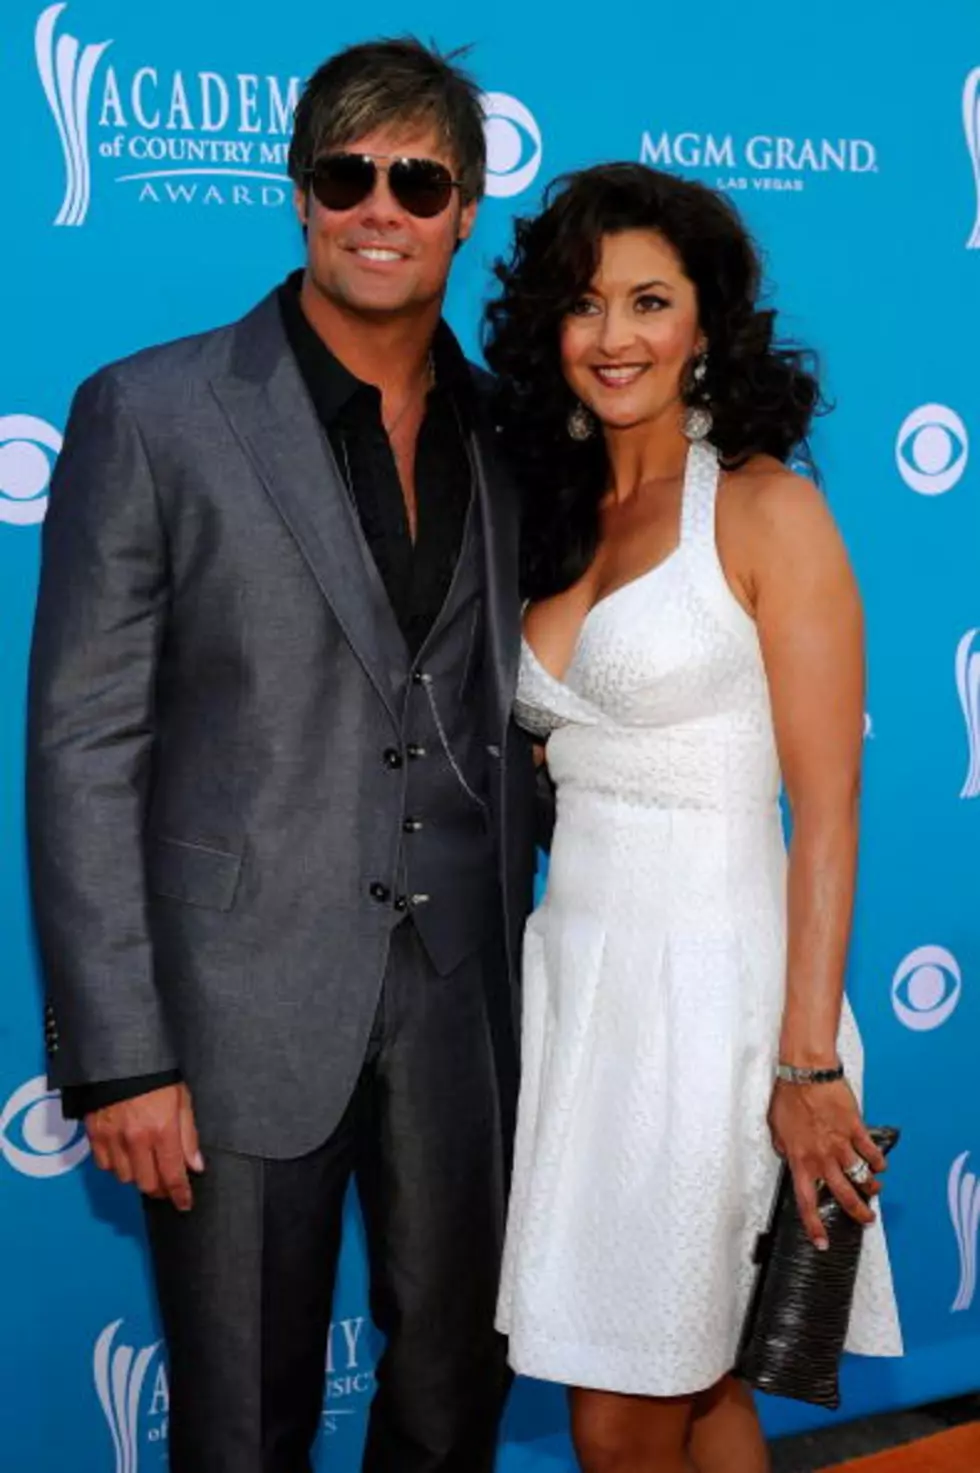 Troy Gentry’s Wife Diagnosed With Breast Cancer